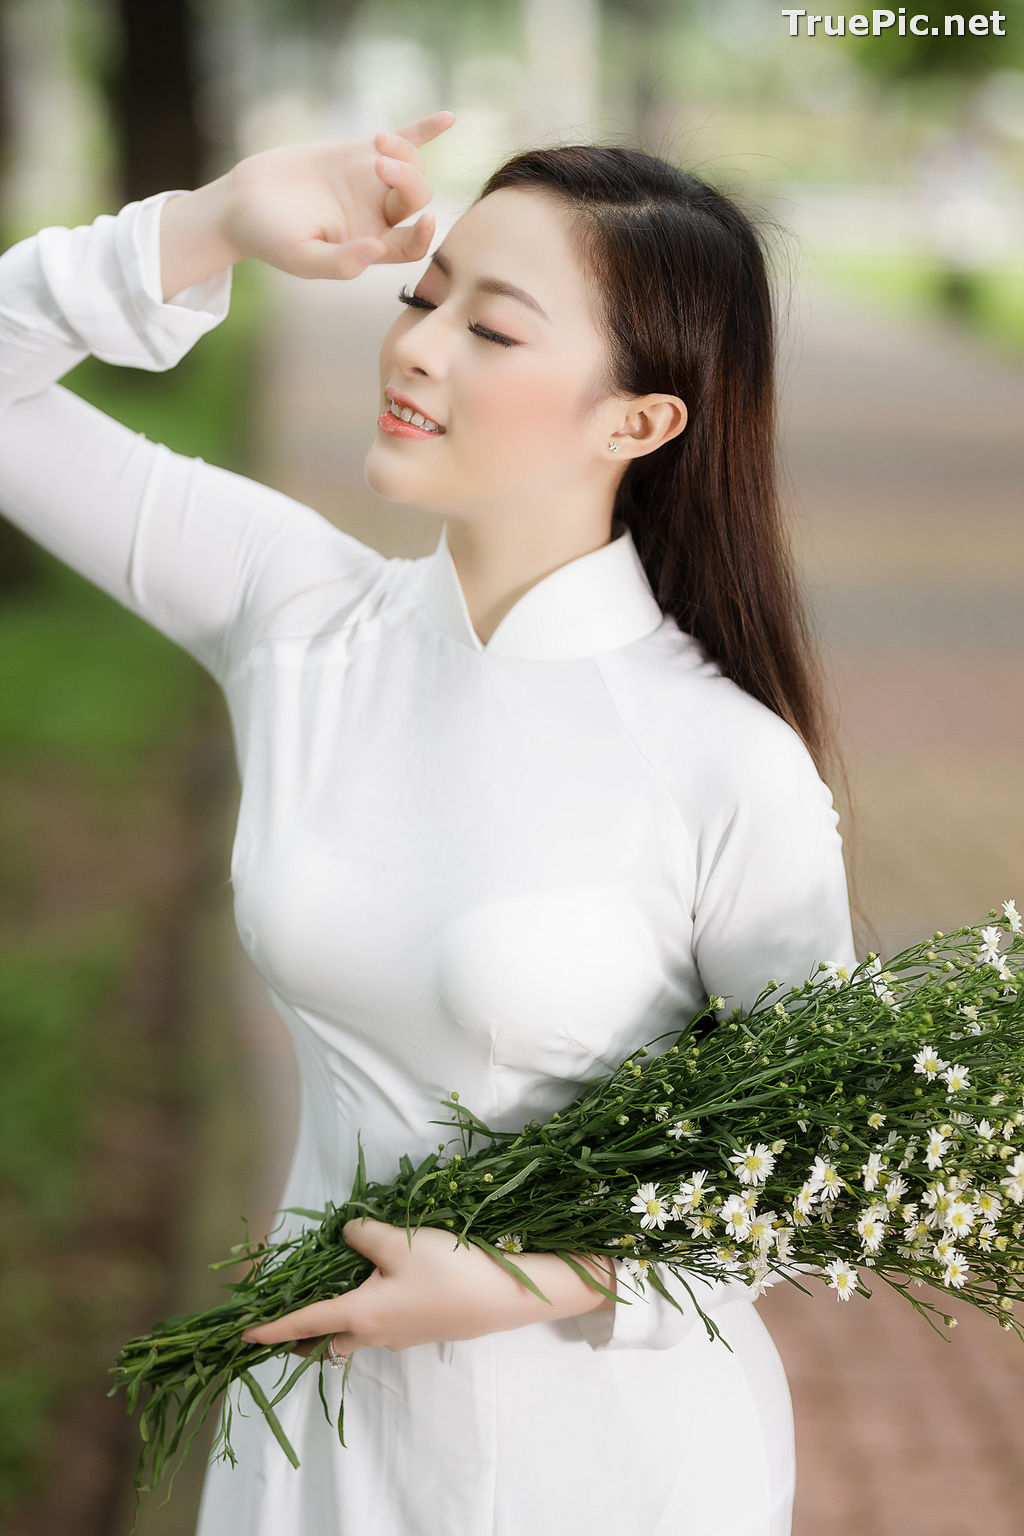 Image The Beauty of Vietnamese Girls with Traditional Dress (Ao Dai) #1 - TruePic.net - Picture-60